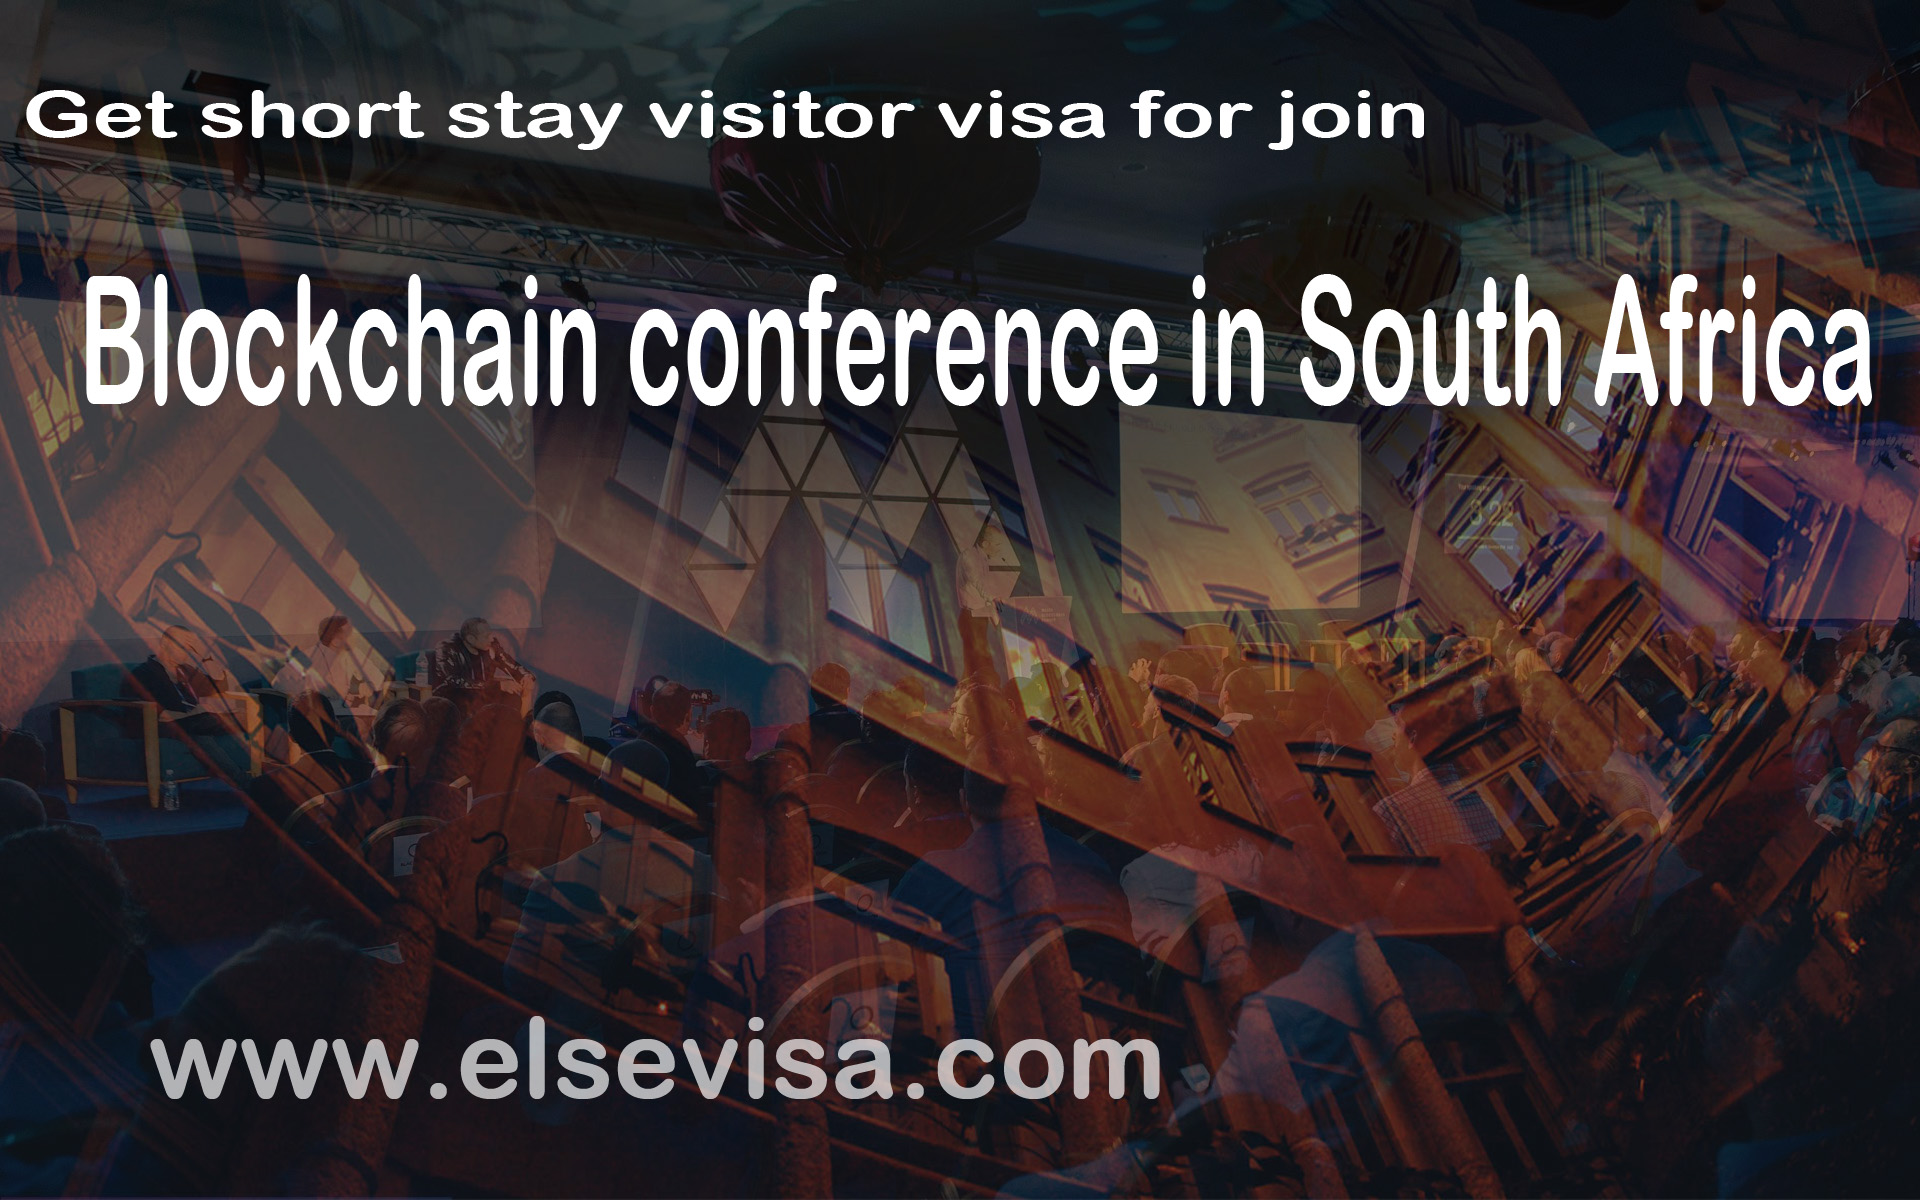 Get short stay visitor visa for join blockchain conference in South Africa